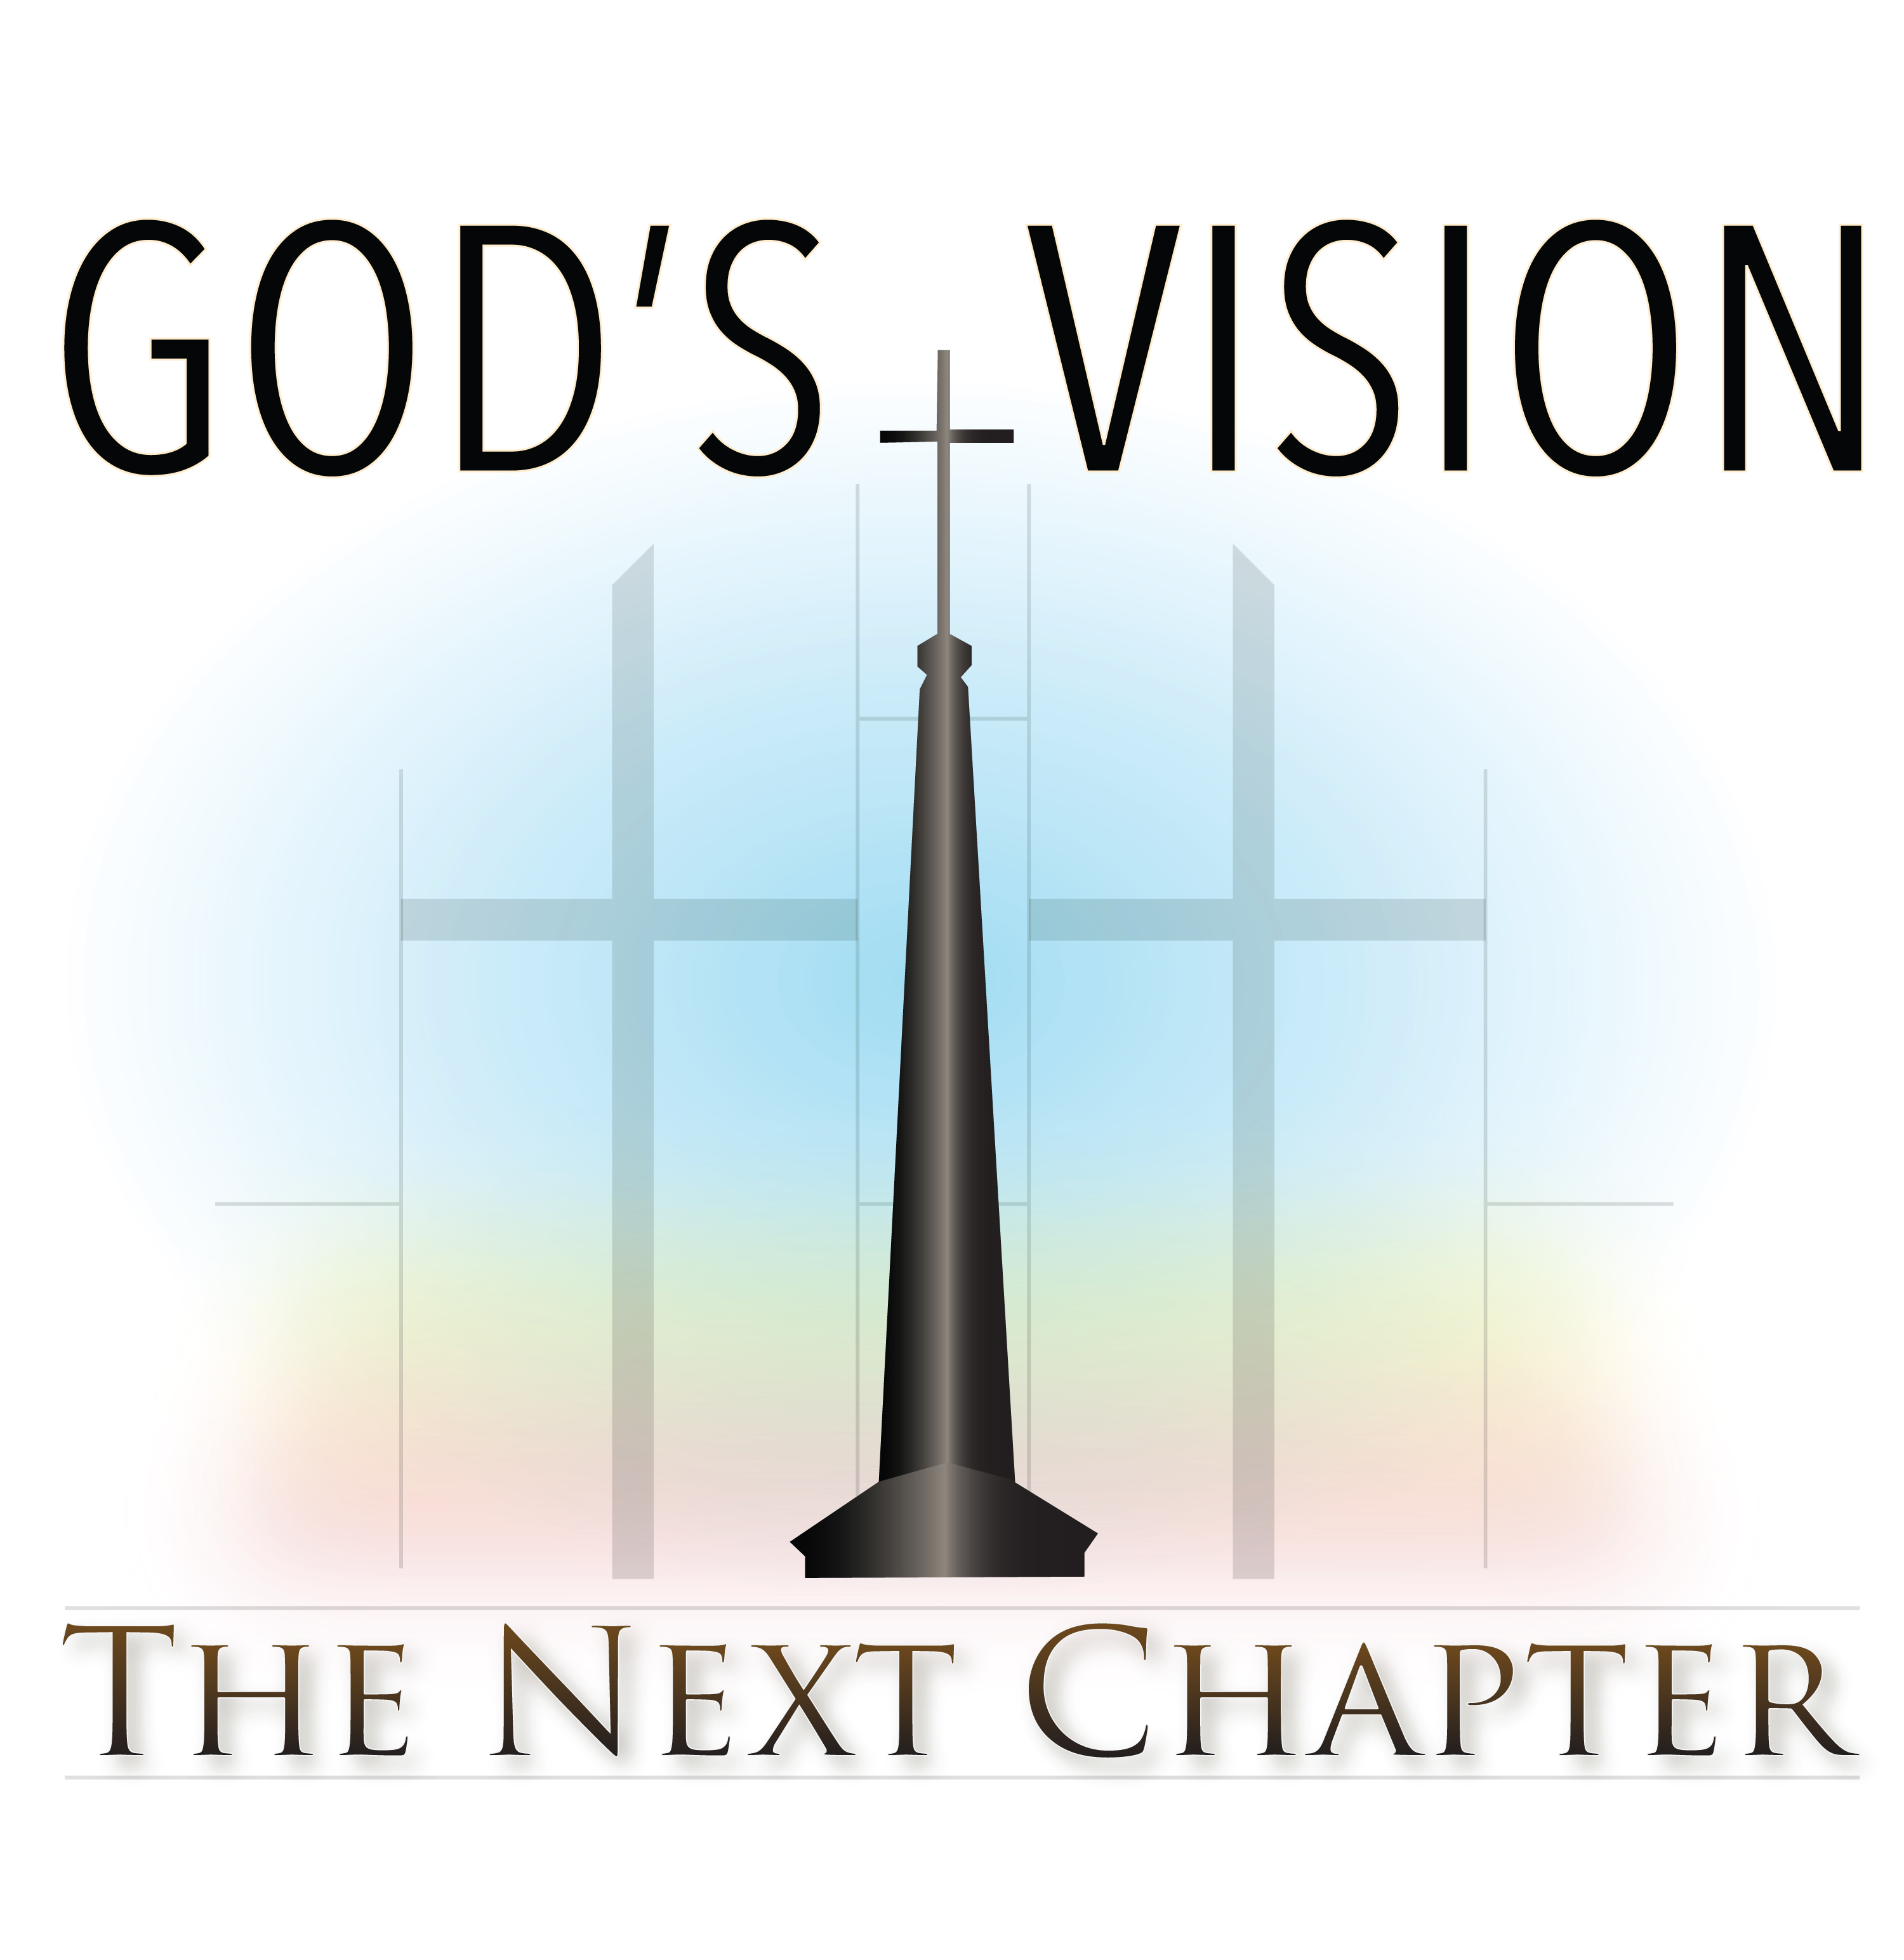 October 30, 2016 - ”God’s Vision: The Next Chapter” - Part II